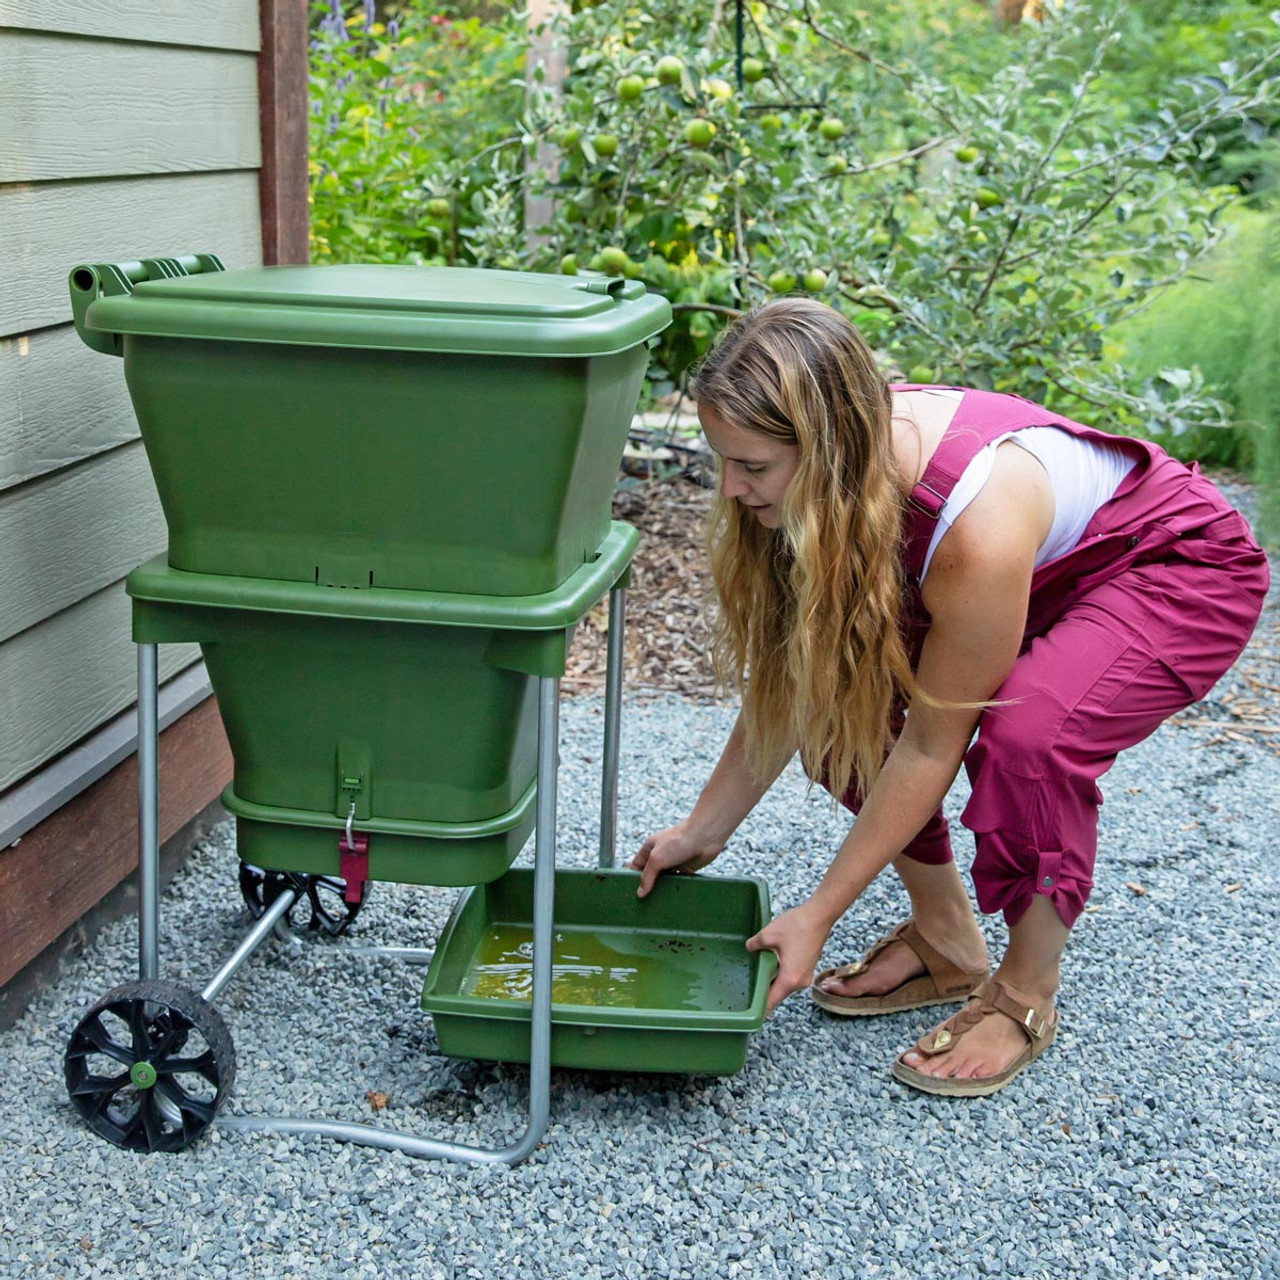 Hungry Bin a Home Worm Composter *Free Shipping - no additional